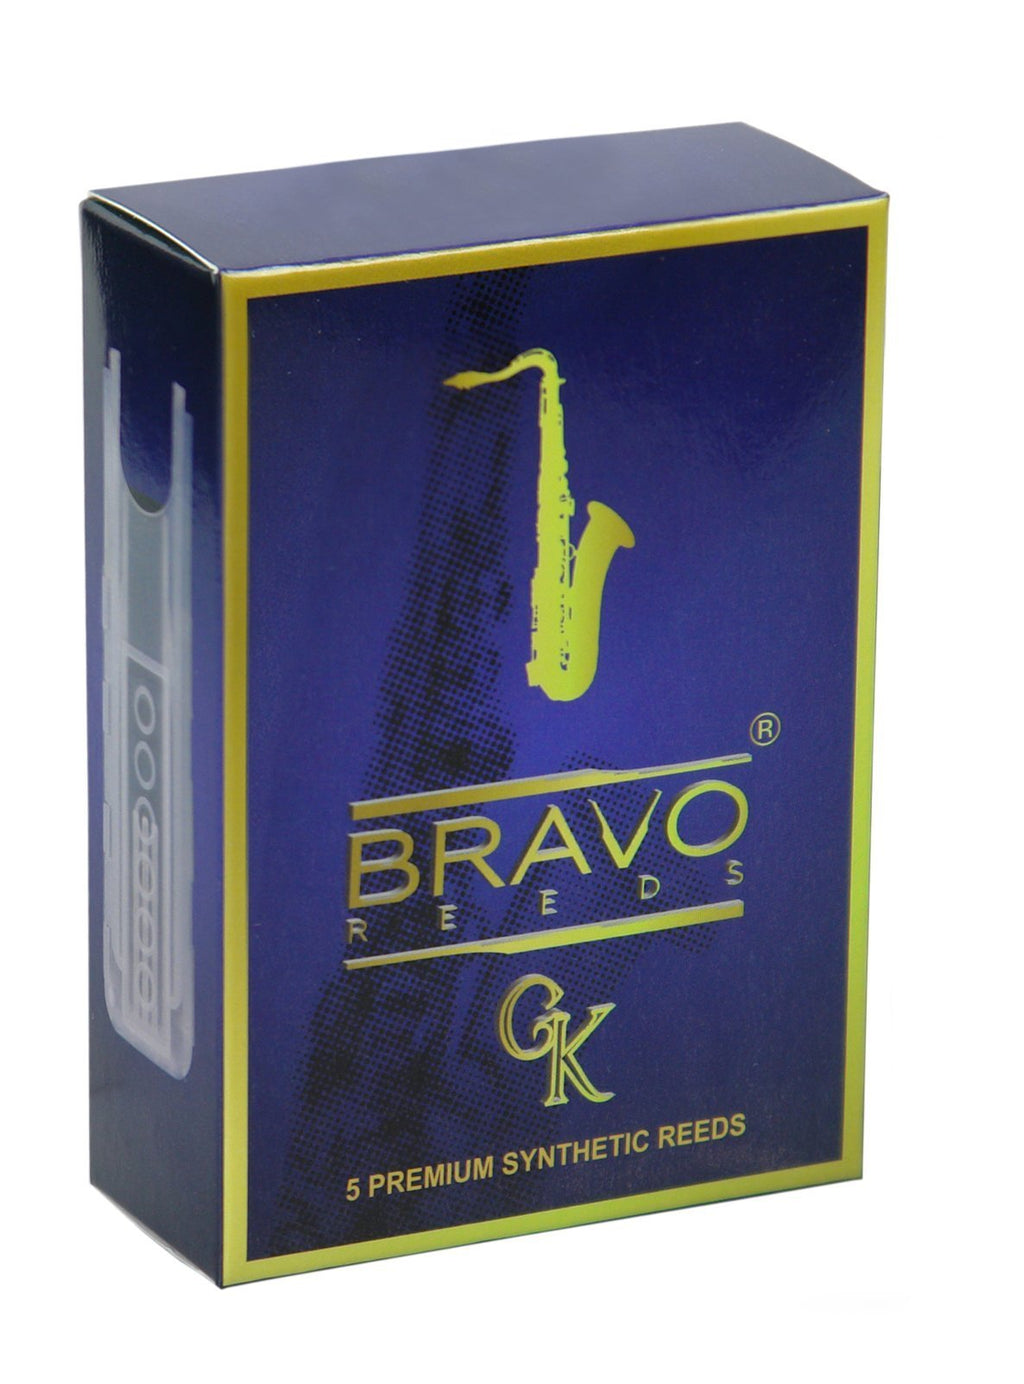 Bravo Synthetic Reeds for Tenor Saxophone-Strength 2.5 (Box of 5), Model BR-TS25